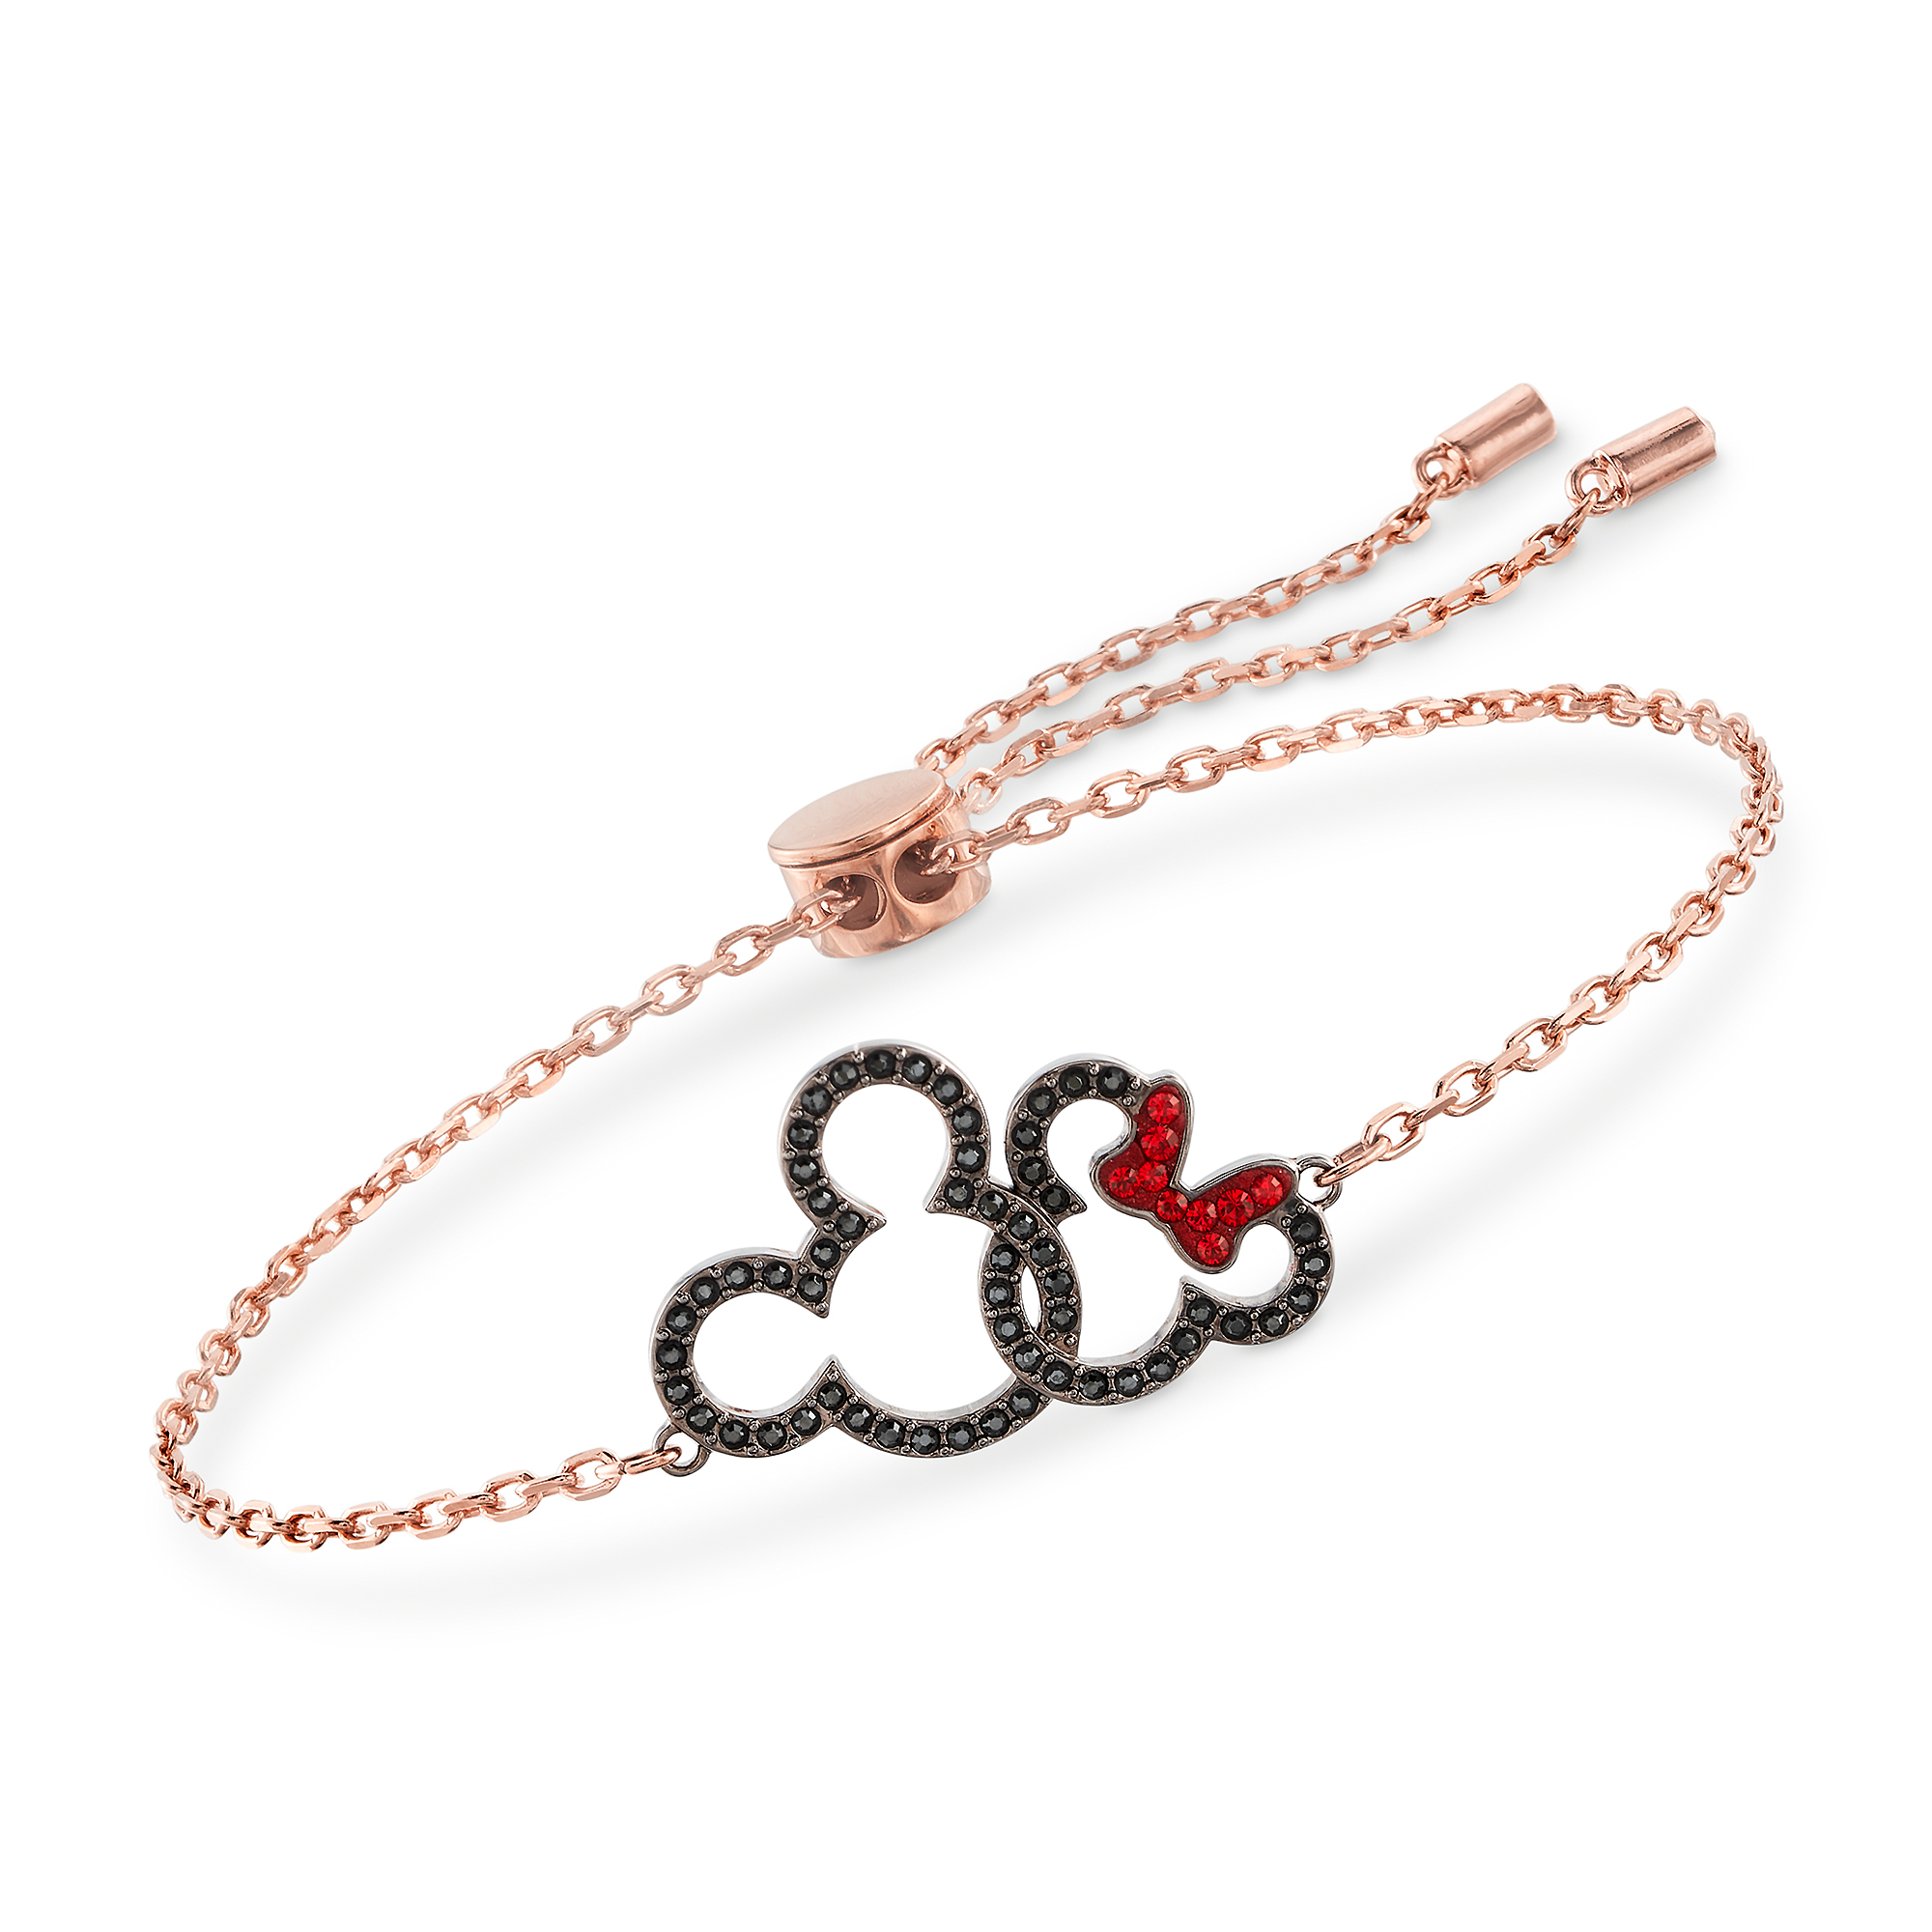 Swarovski Crystal Mickey and Minnie Mouse Bolo Bracelet in Rose Gold-Plated  Metal | Ross-Simons